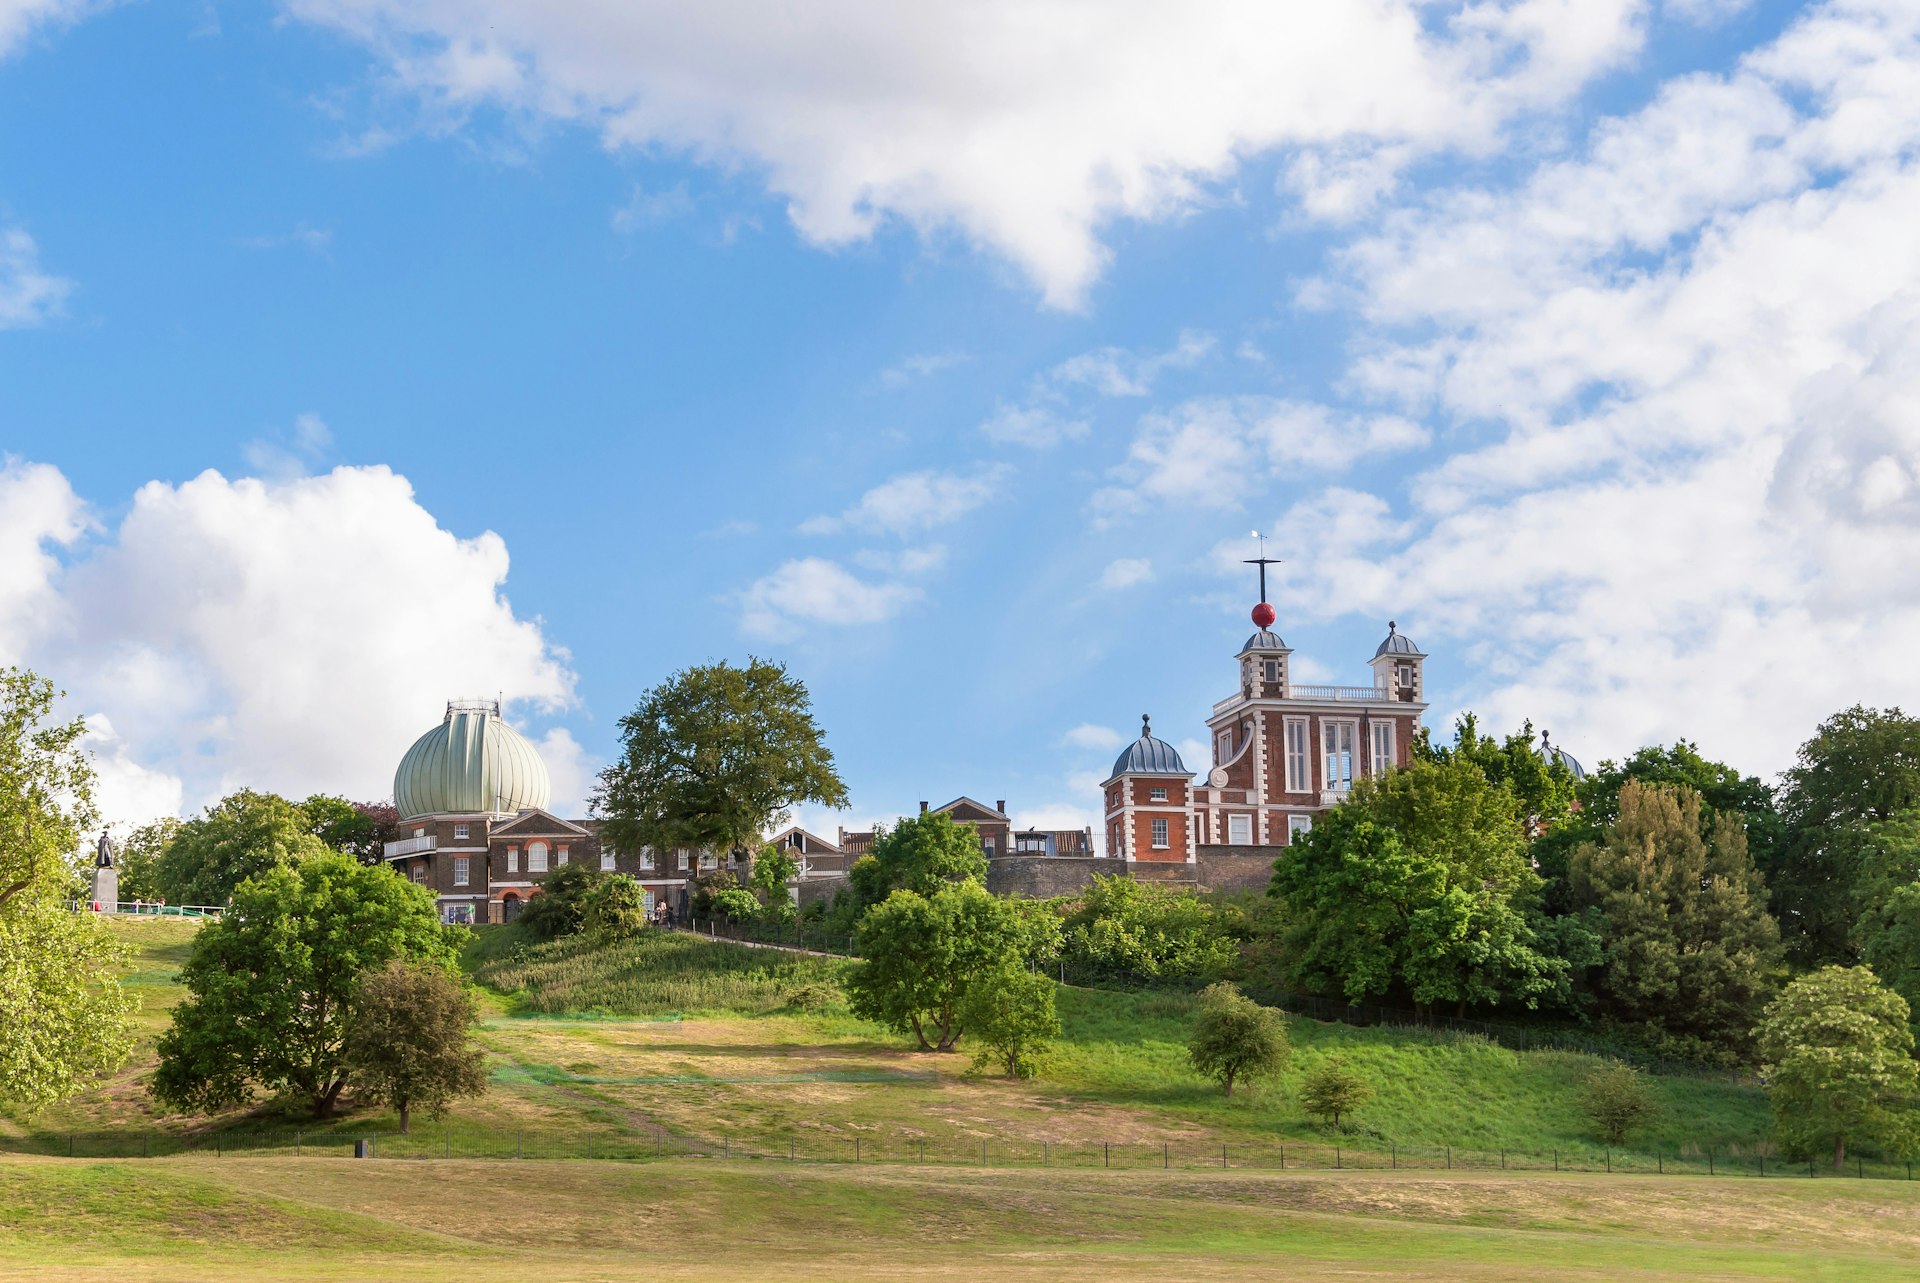 Looking up a hill towards the Royal Observatory in Greenwich Park